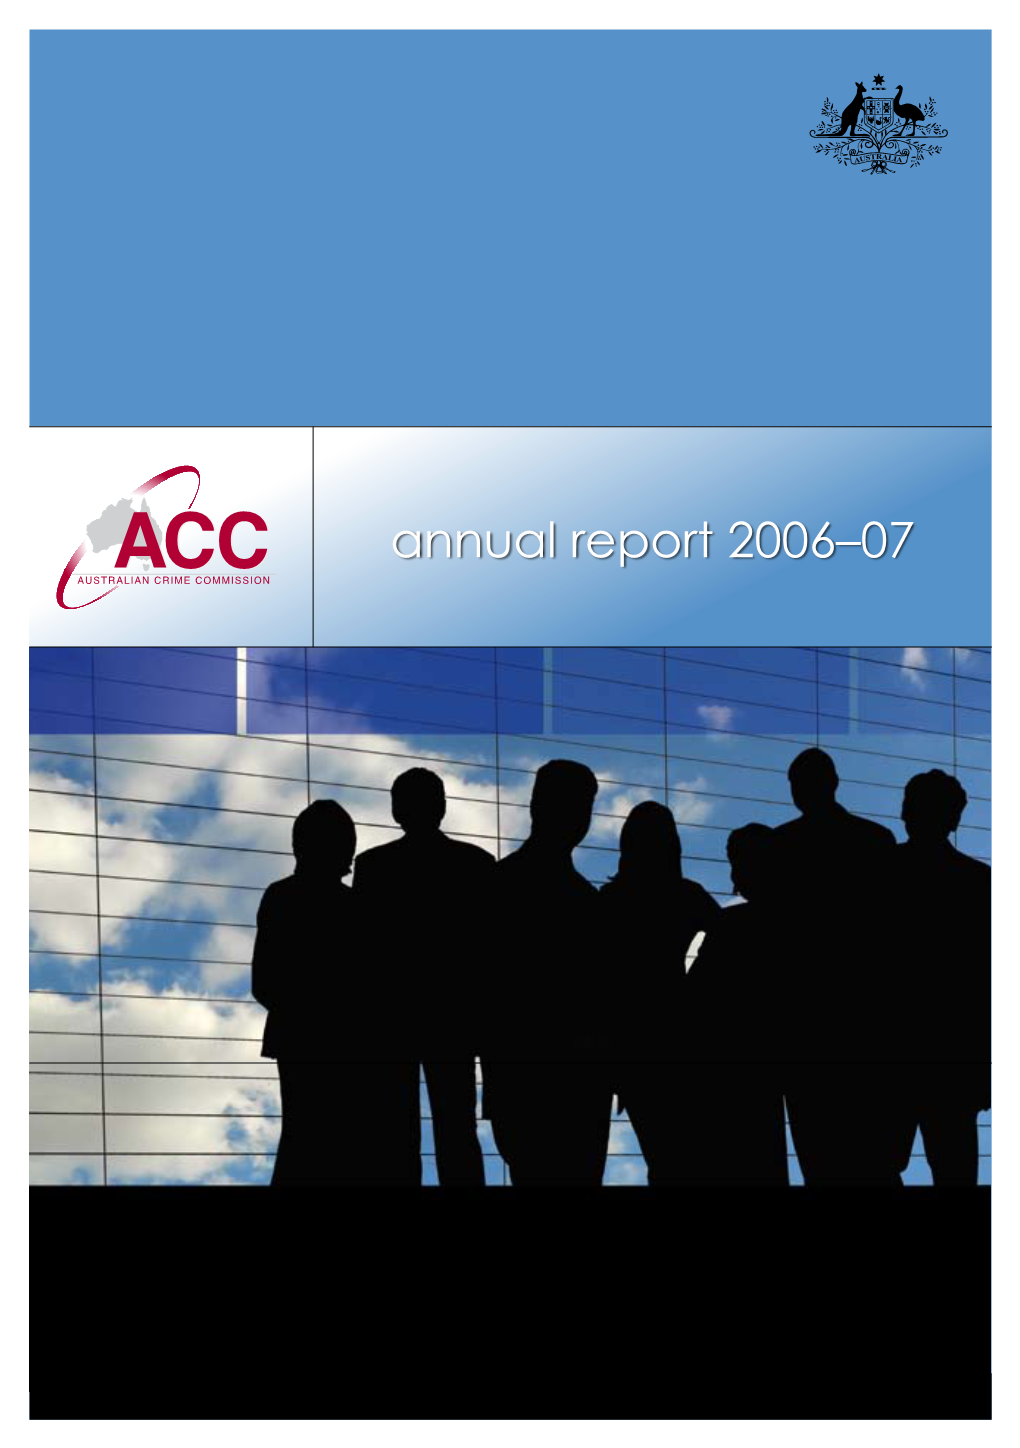 ACC) Operations and Performance for the Financial Year Ending 30 June 2007